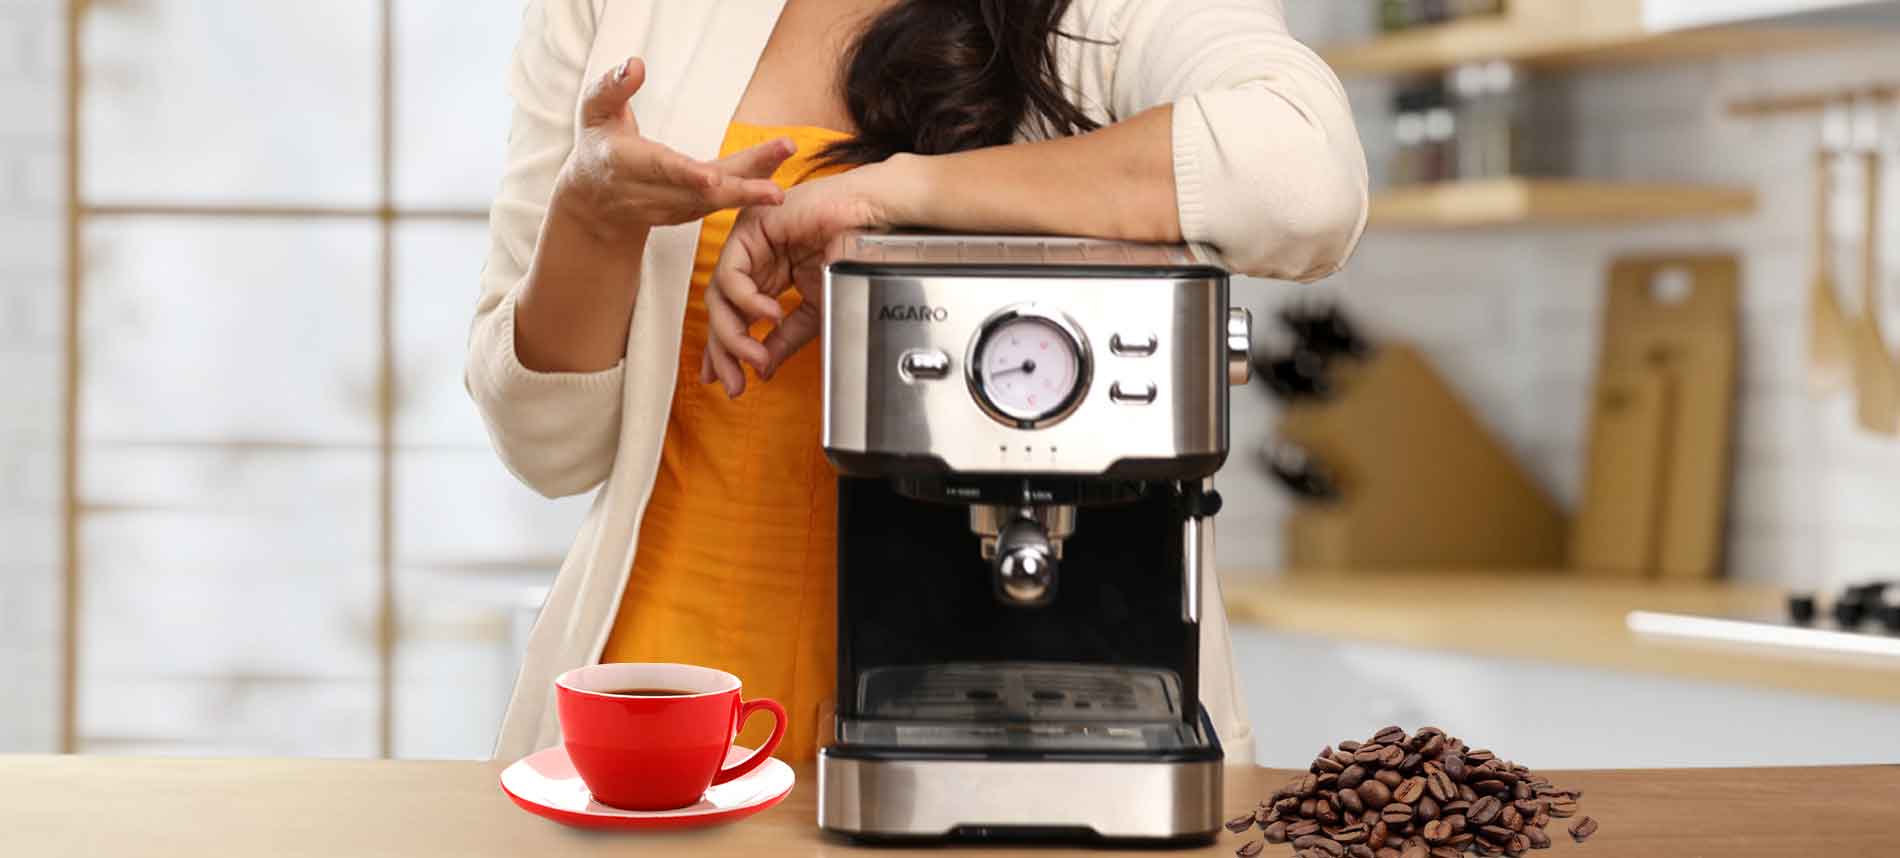 Best South Indian Filter Coffee Maker in 2023: Top 5 Recommendations – Agaro